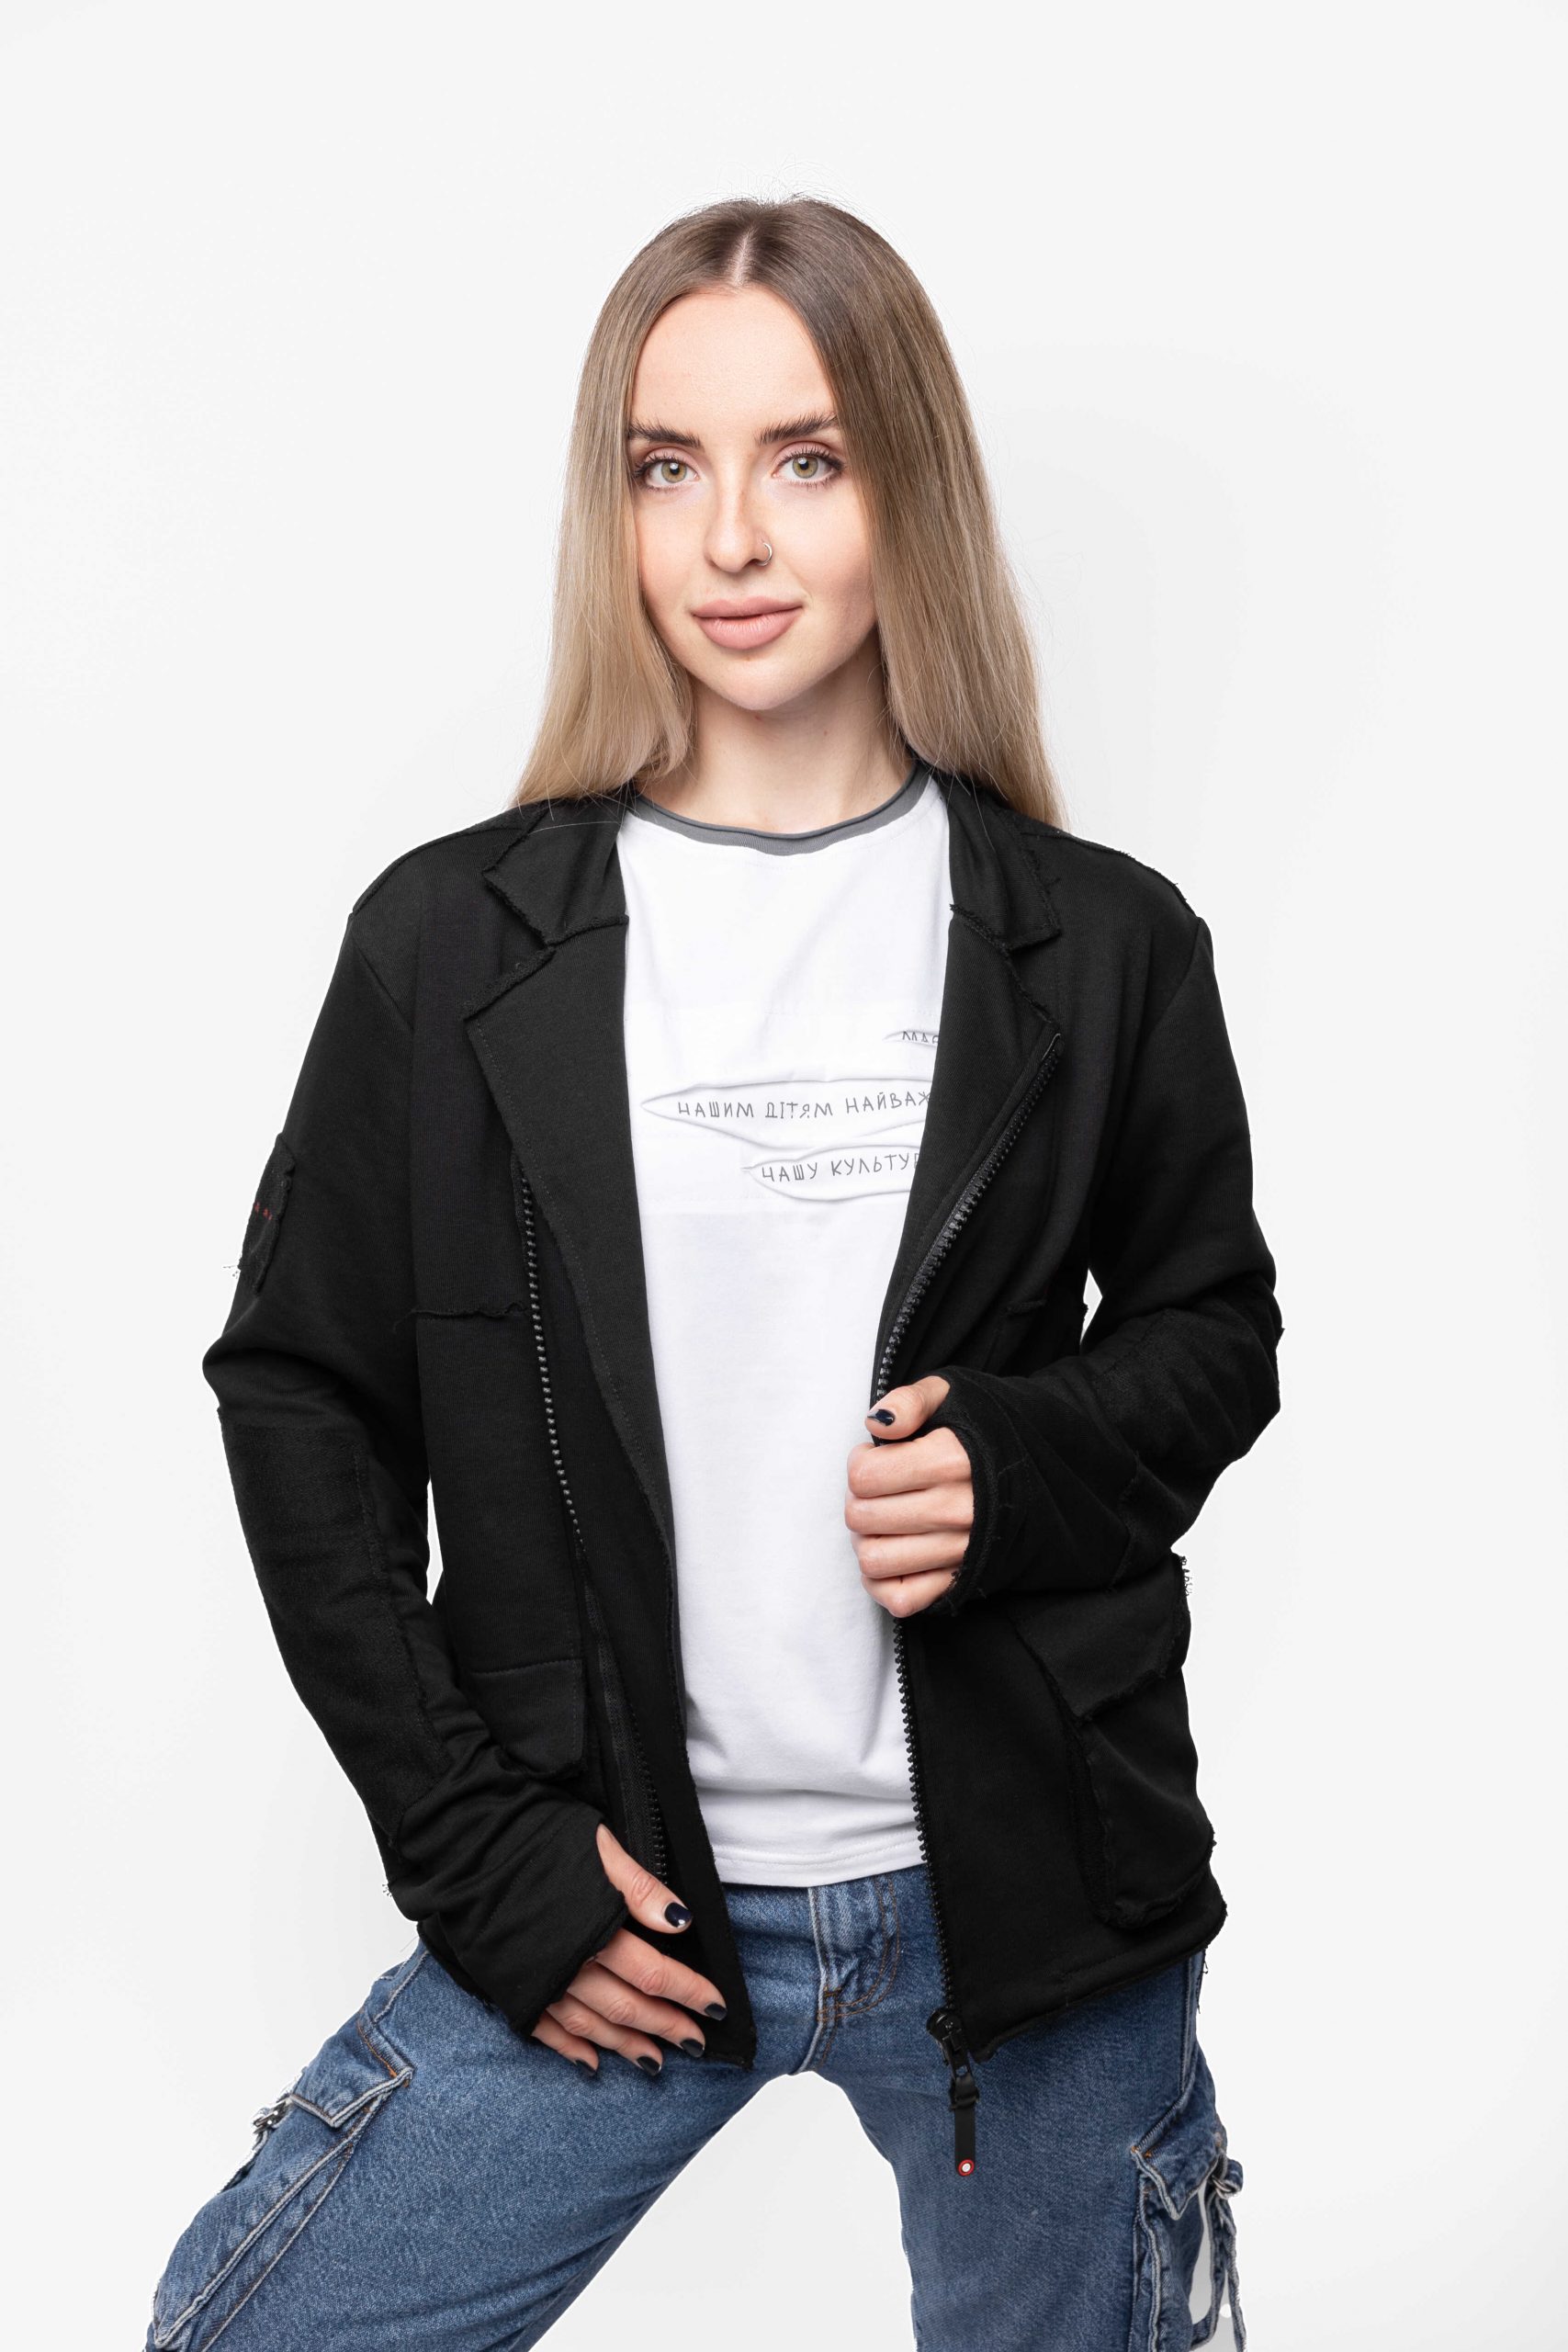 Women’s Cardigan What You Believe In. Color black. 2.